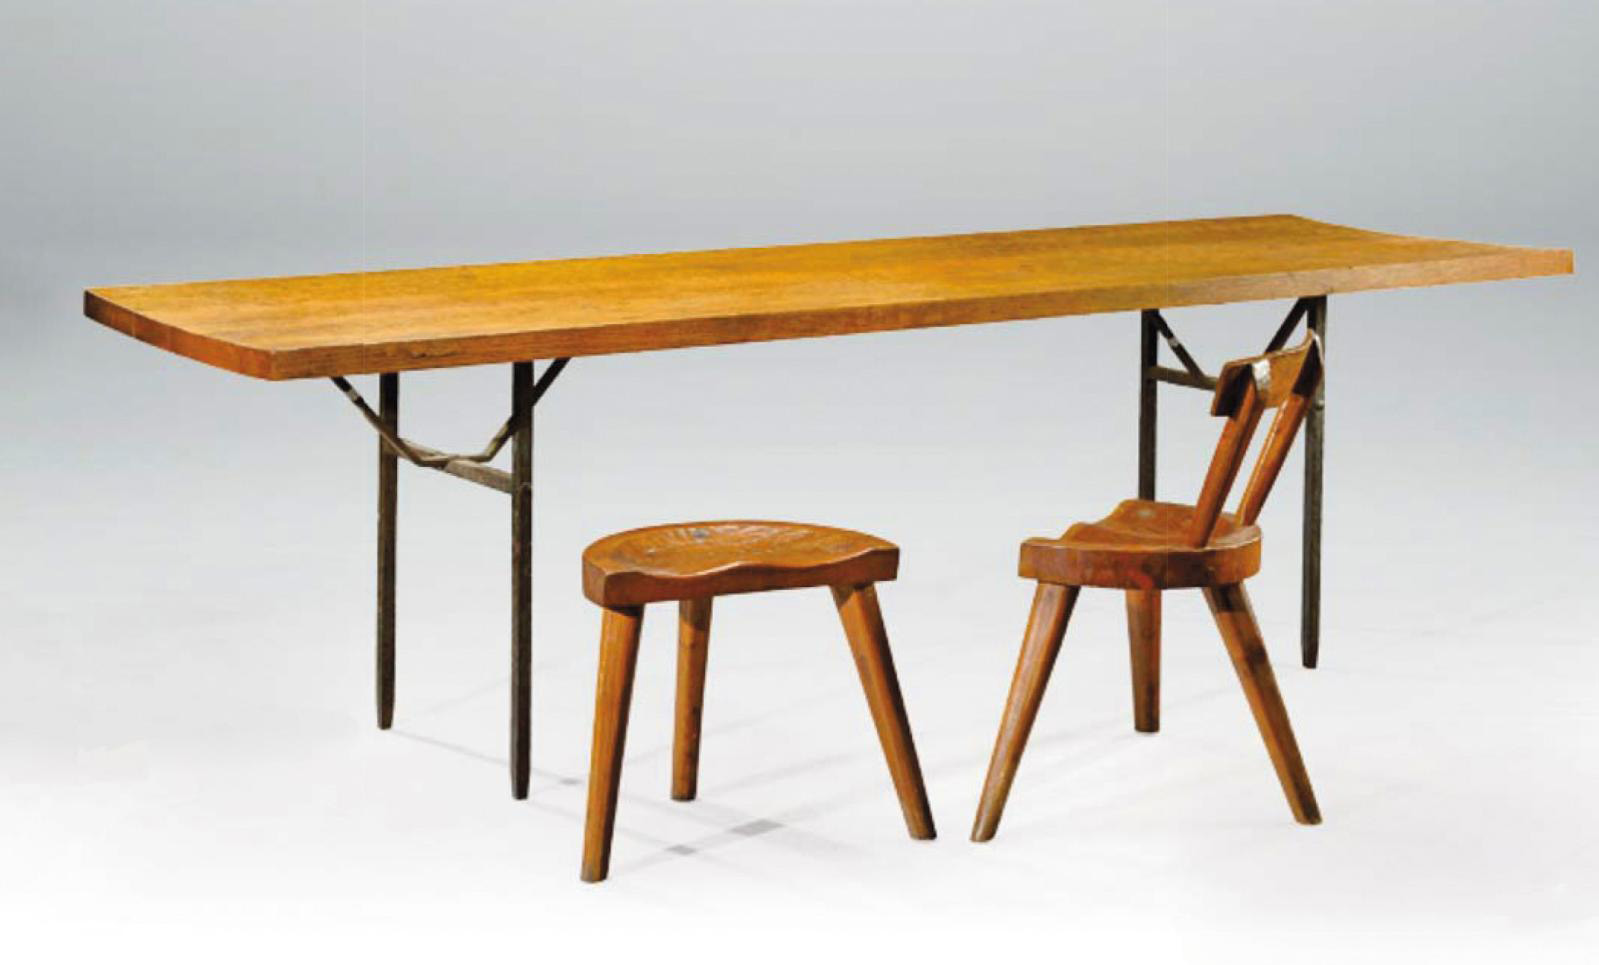 Jean Touret for Les Ateliers Marolles, dining room table, c. 1950–1960, solid carved oak, black lacquered metal, 75 x 250 x 78 cm/ 29.52 x